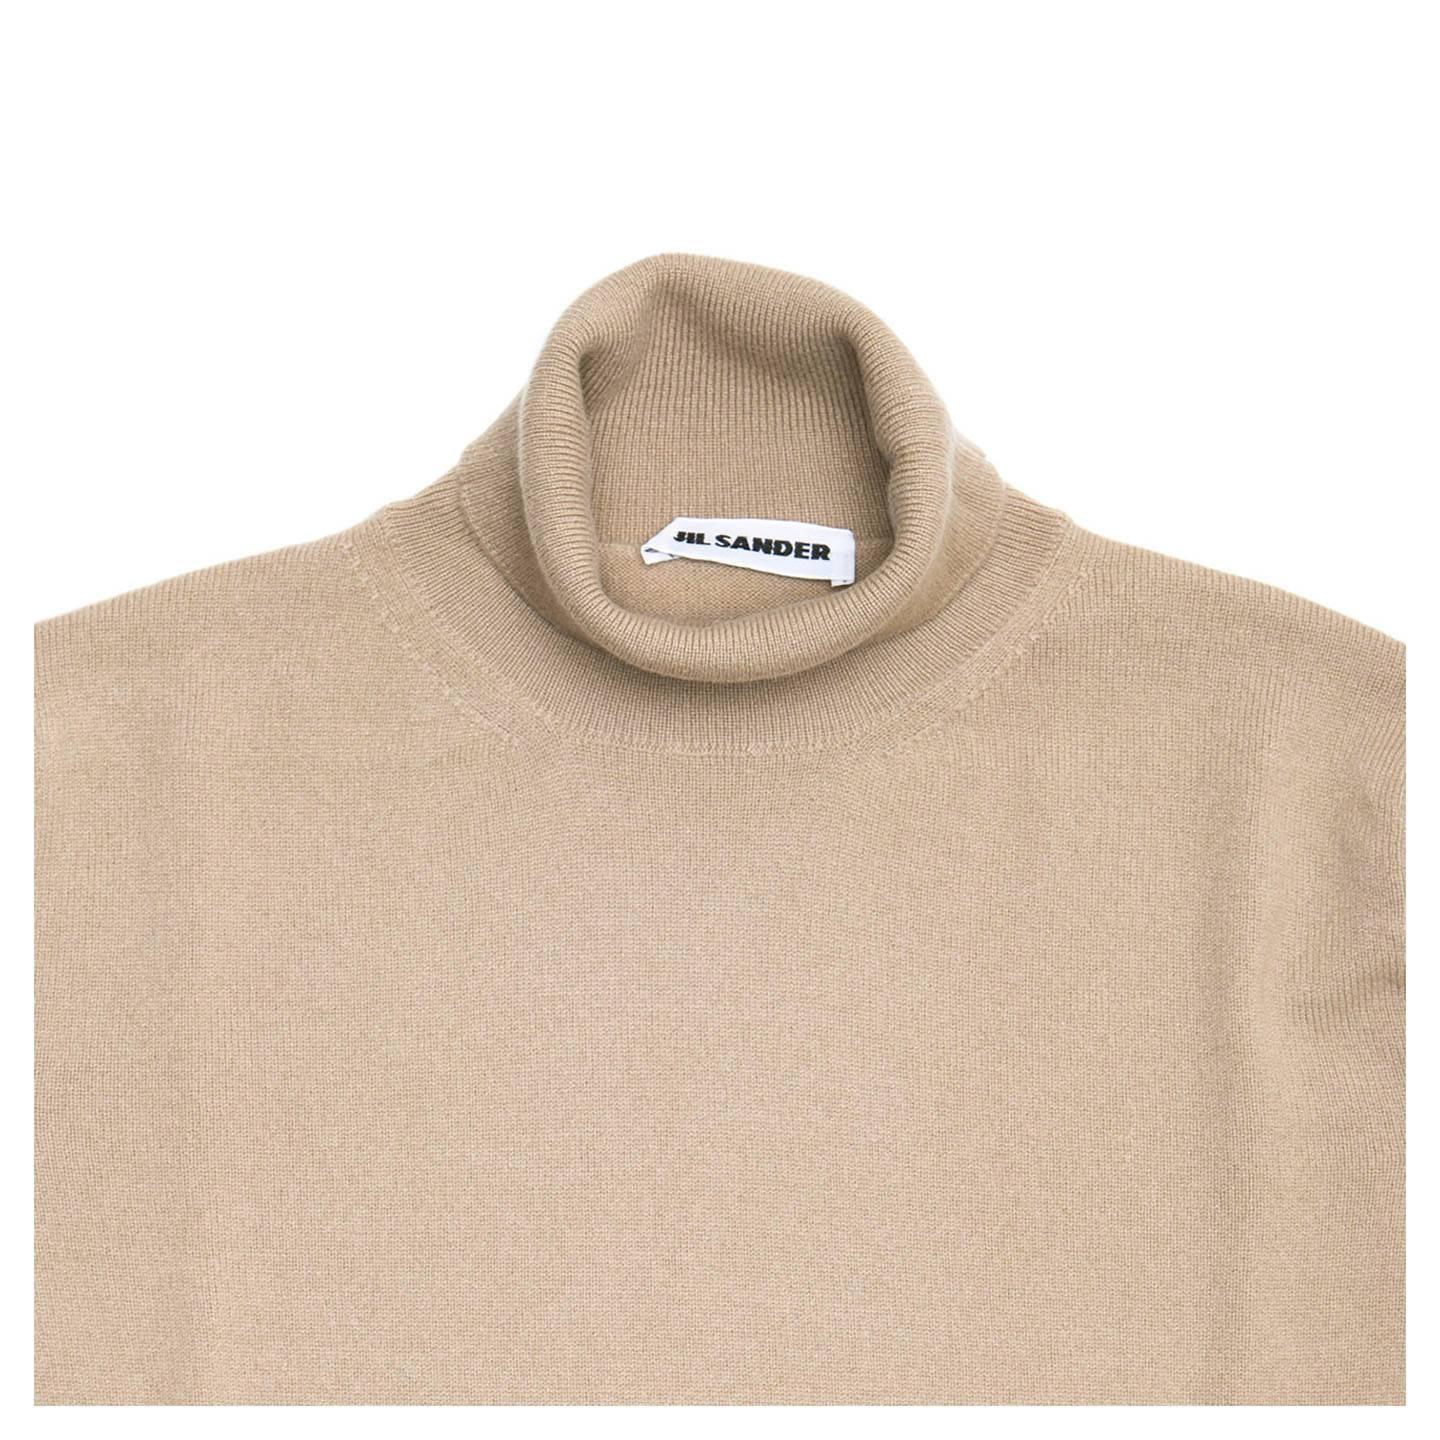 Jil Sander Brown Cashmere Rollneck Sweater In Excellent Condition For Sale In Brooklyn, NY